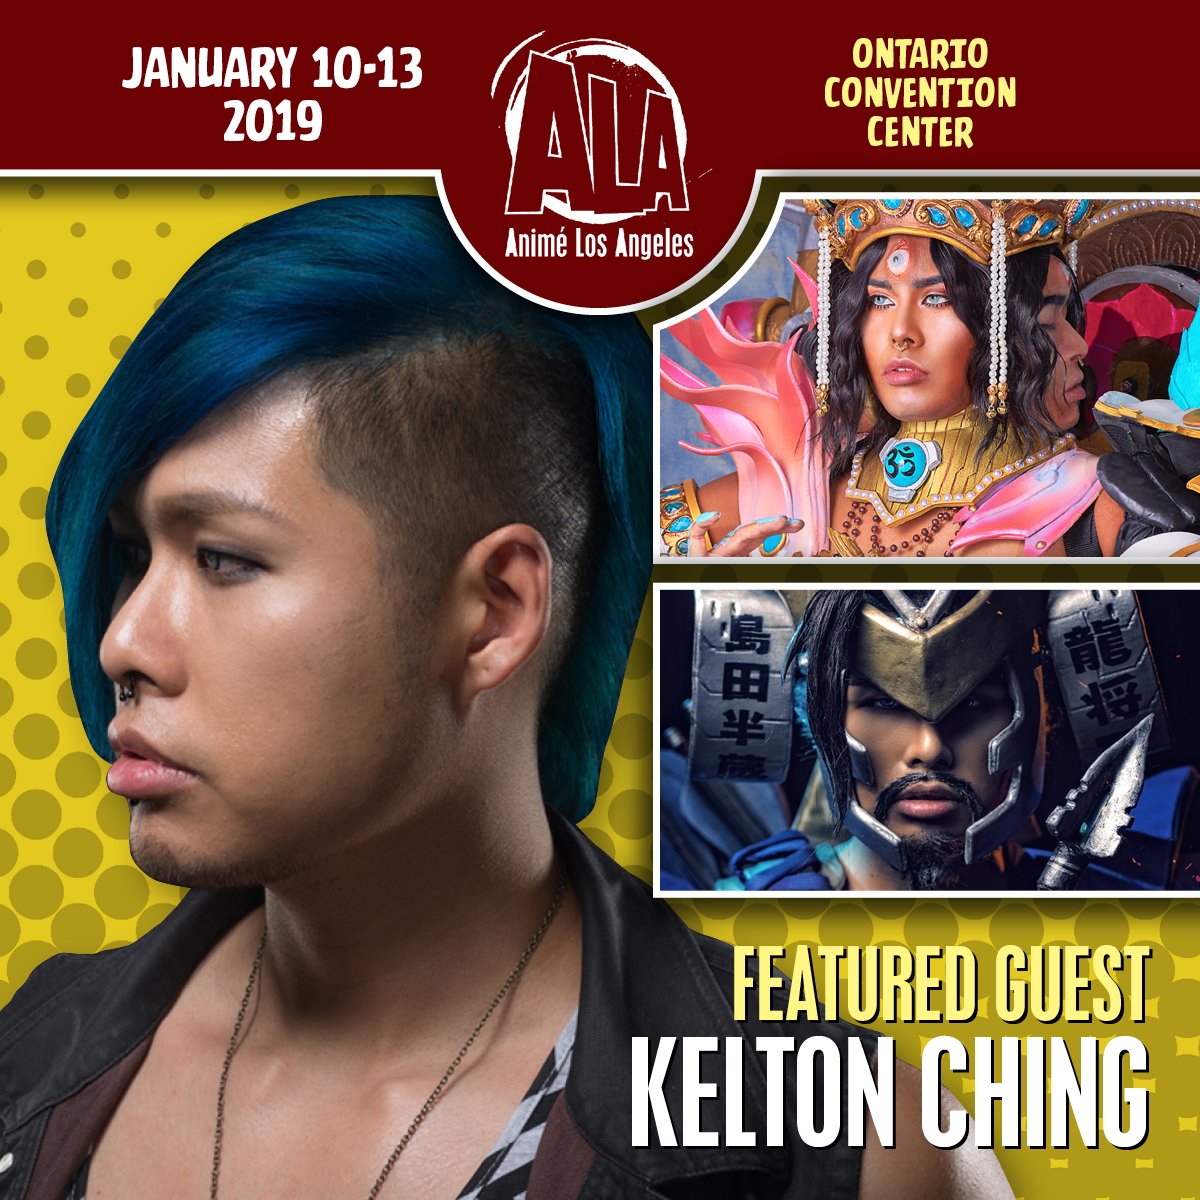 ALA 15 Featured Guest @KeltonFX will be at Animé Los Angeles 15 this January 10th to 13th at the Ontario Convention Center!
----------
For info & registration: bit.ly/ALA15-Registra…
#AnimeLosAngeles #ALA15 #Anime #KeltonChing